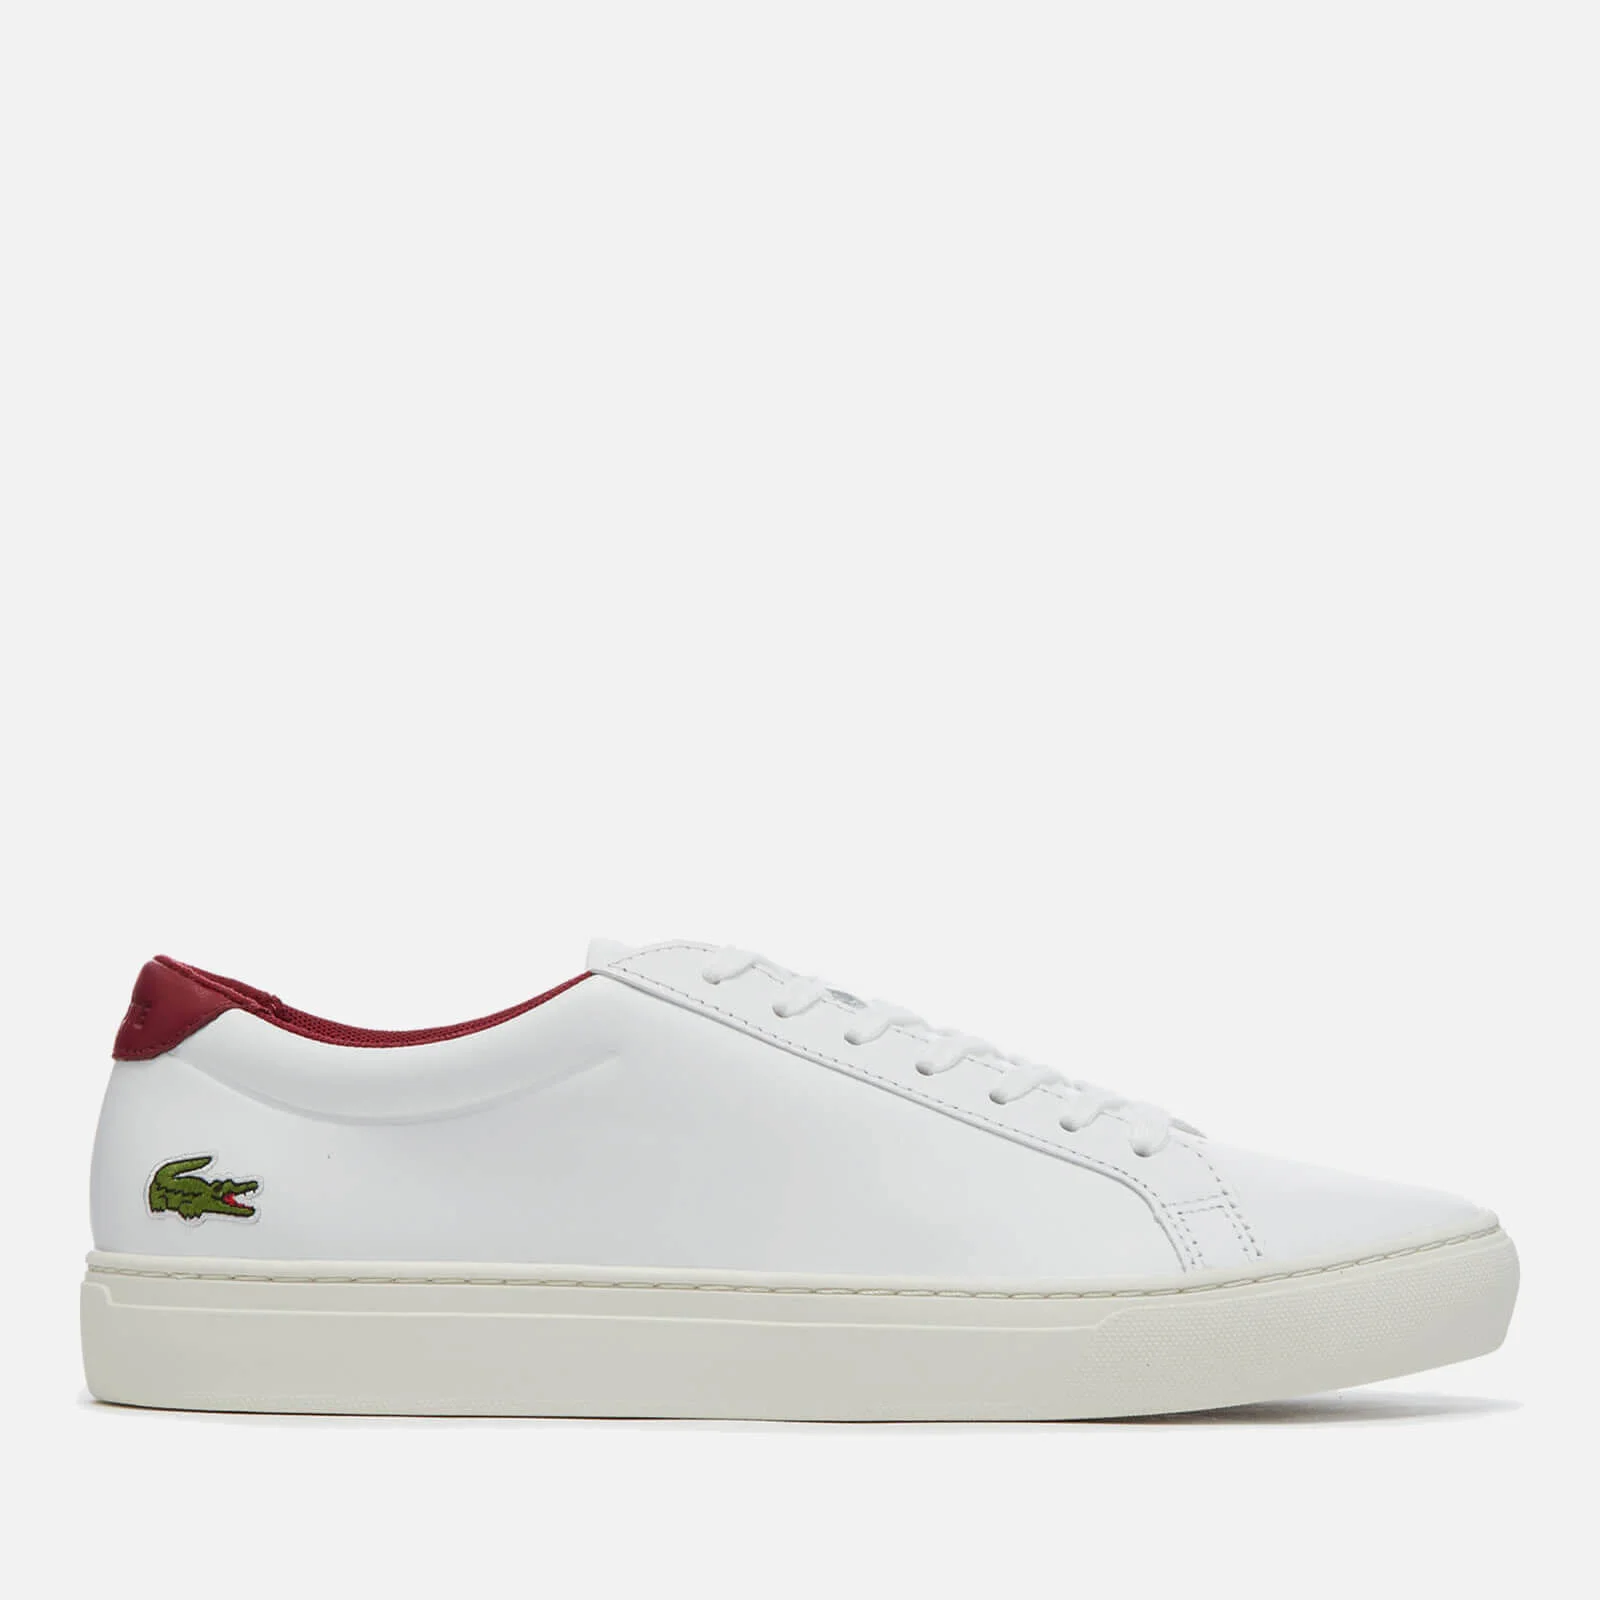 Lacoste Men's L.12.12 117 2 Leather Cupsole Trainers - White/Dark Red Image 1